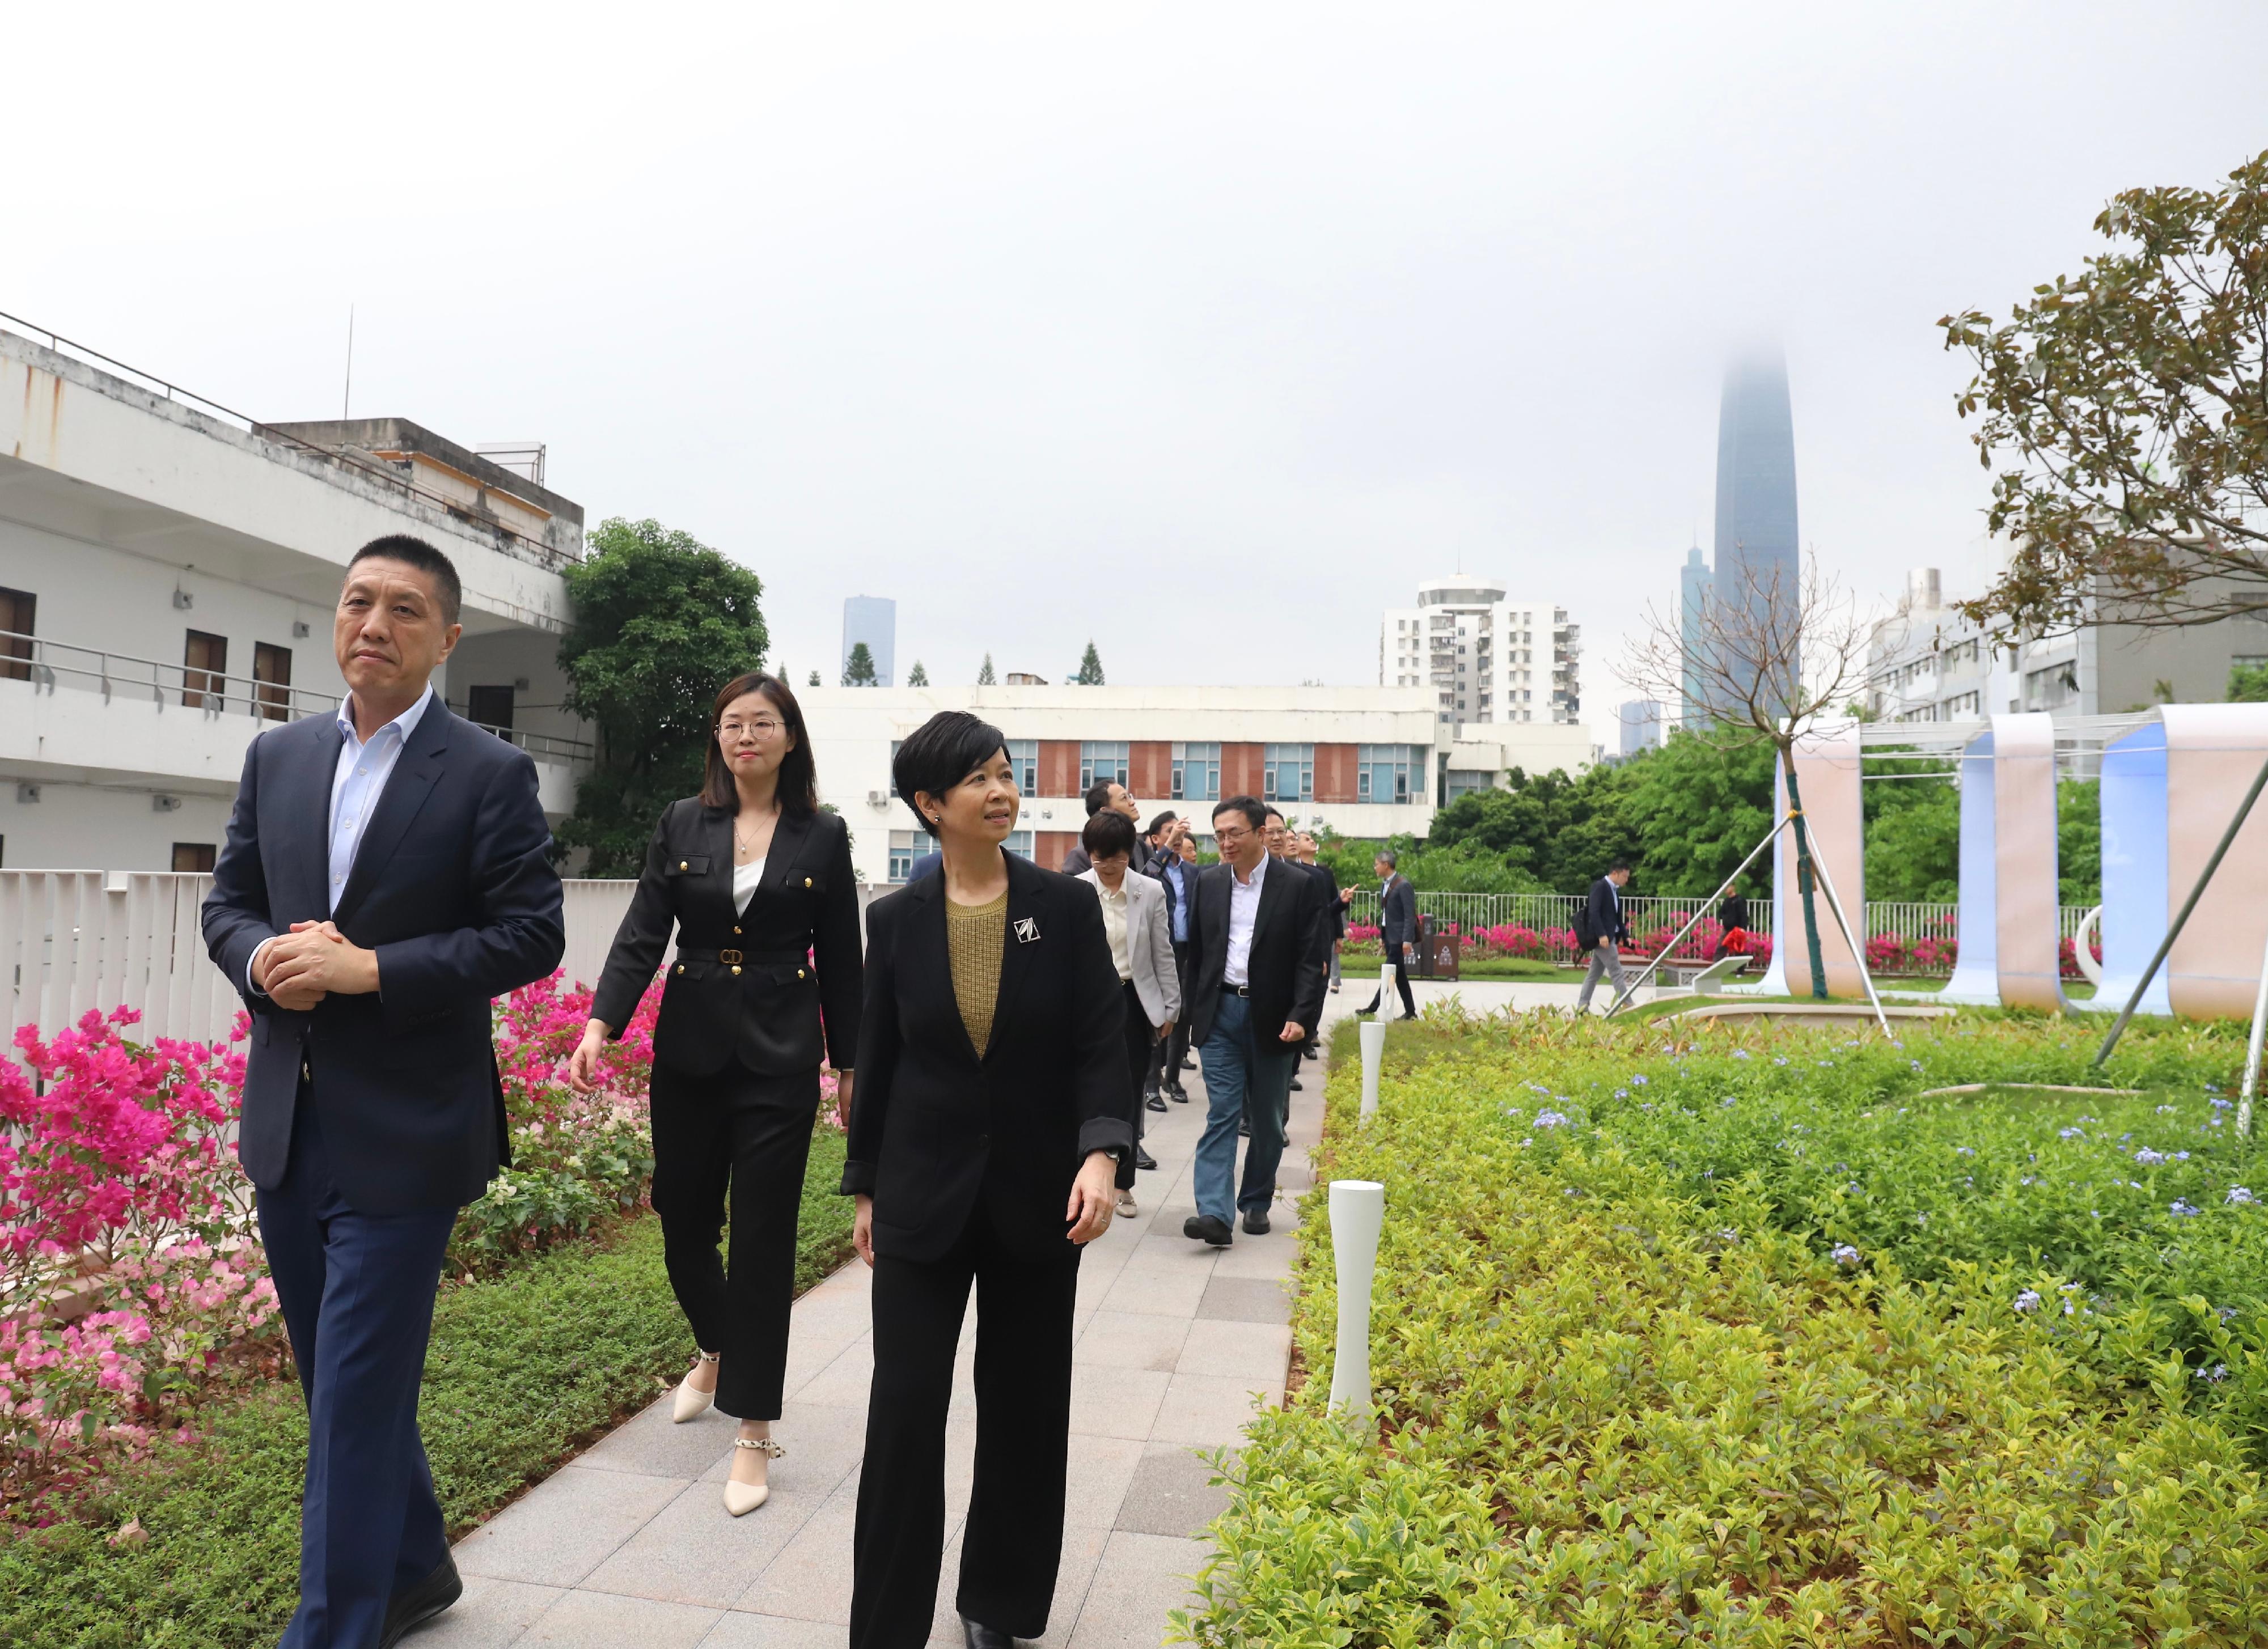 The Secretary for Housing, Ms Winnie Ho, led representatives of the Housing Bureau, the Housing Department and the Architectural Services Department to Shenzhen today (April 3). Photo shows Ms Ho (right), accompanied by the Party Secretary and Director-General of the Housing and Construction Bureau of Shenzhen Municipality, Mr Xu Songming (left), visiting the Ganquan Road Net-Zero Carbon Community Renovation Project in Futian District to learn about the application of green building technologies to improve the environment and the implementation of the vision of near-zero carbon emission in Shenzhen.